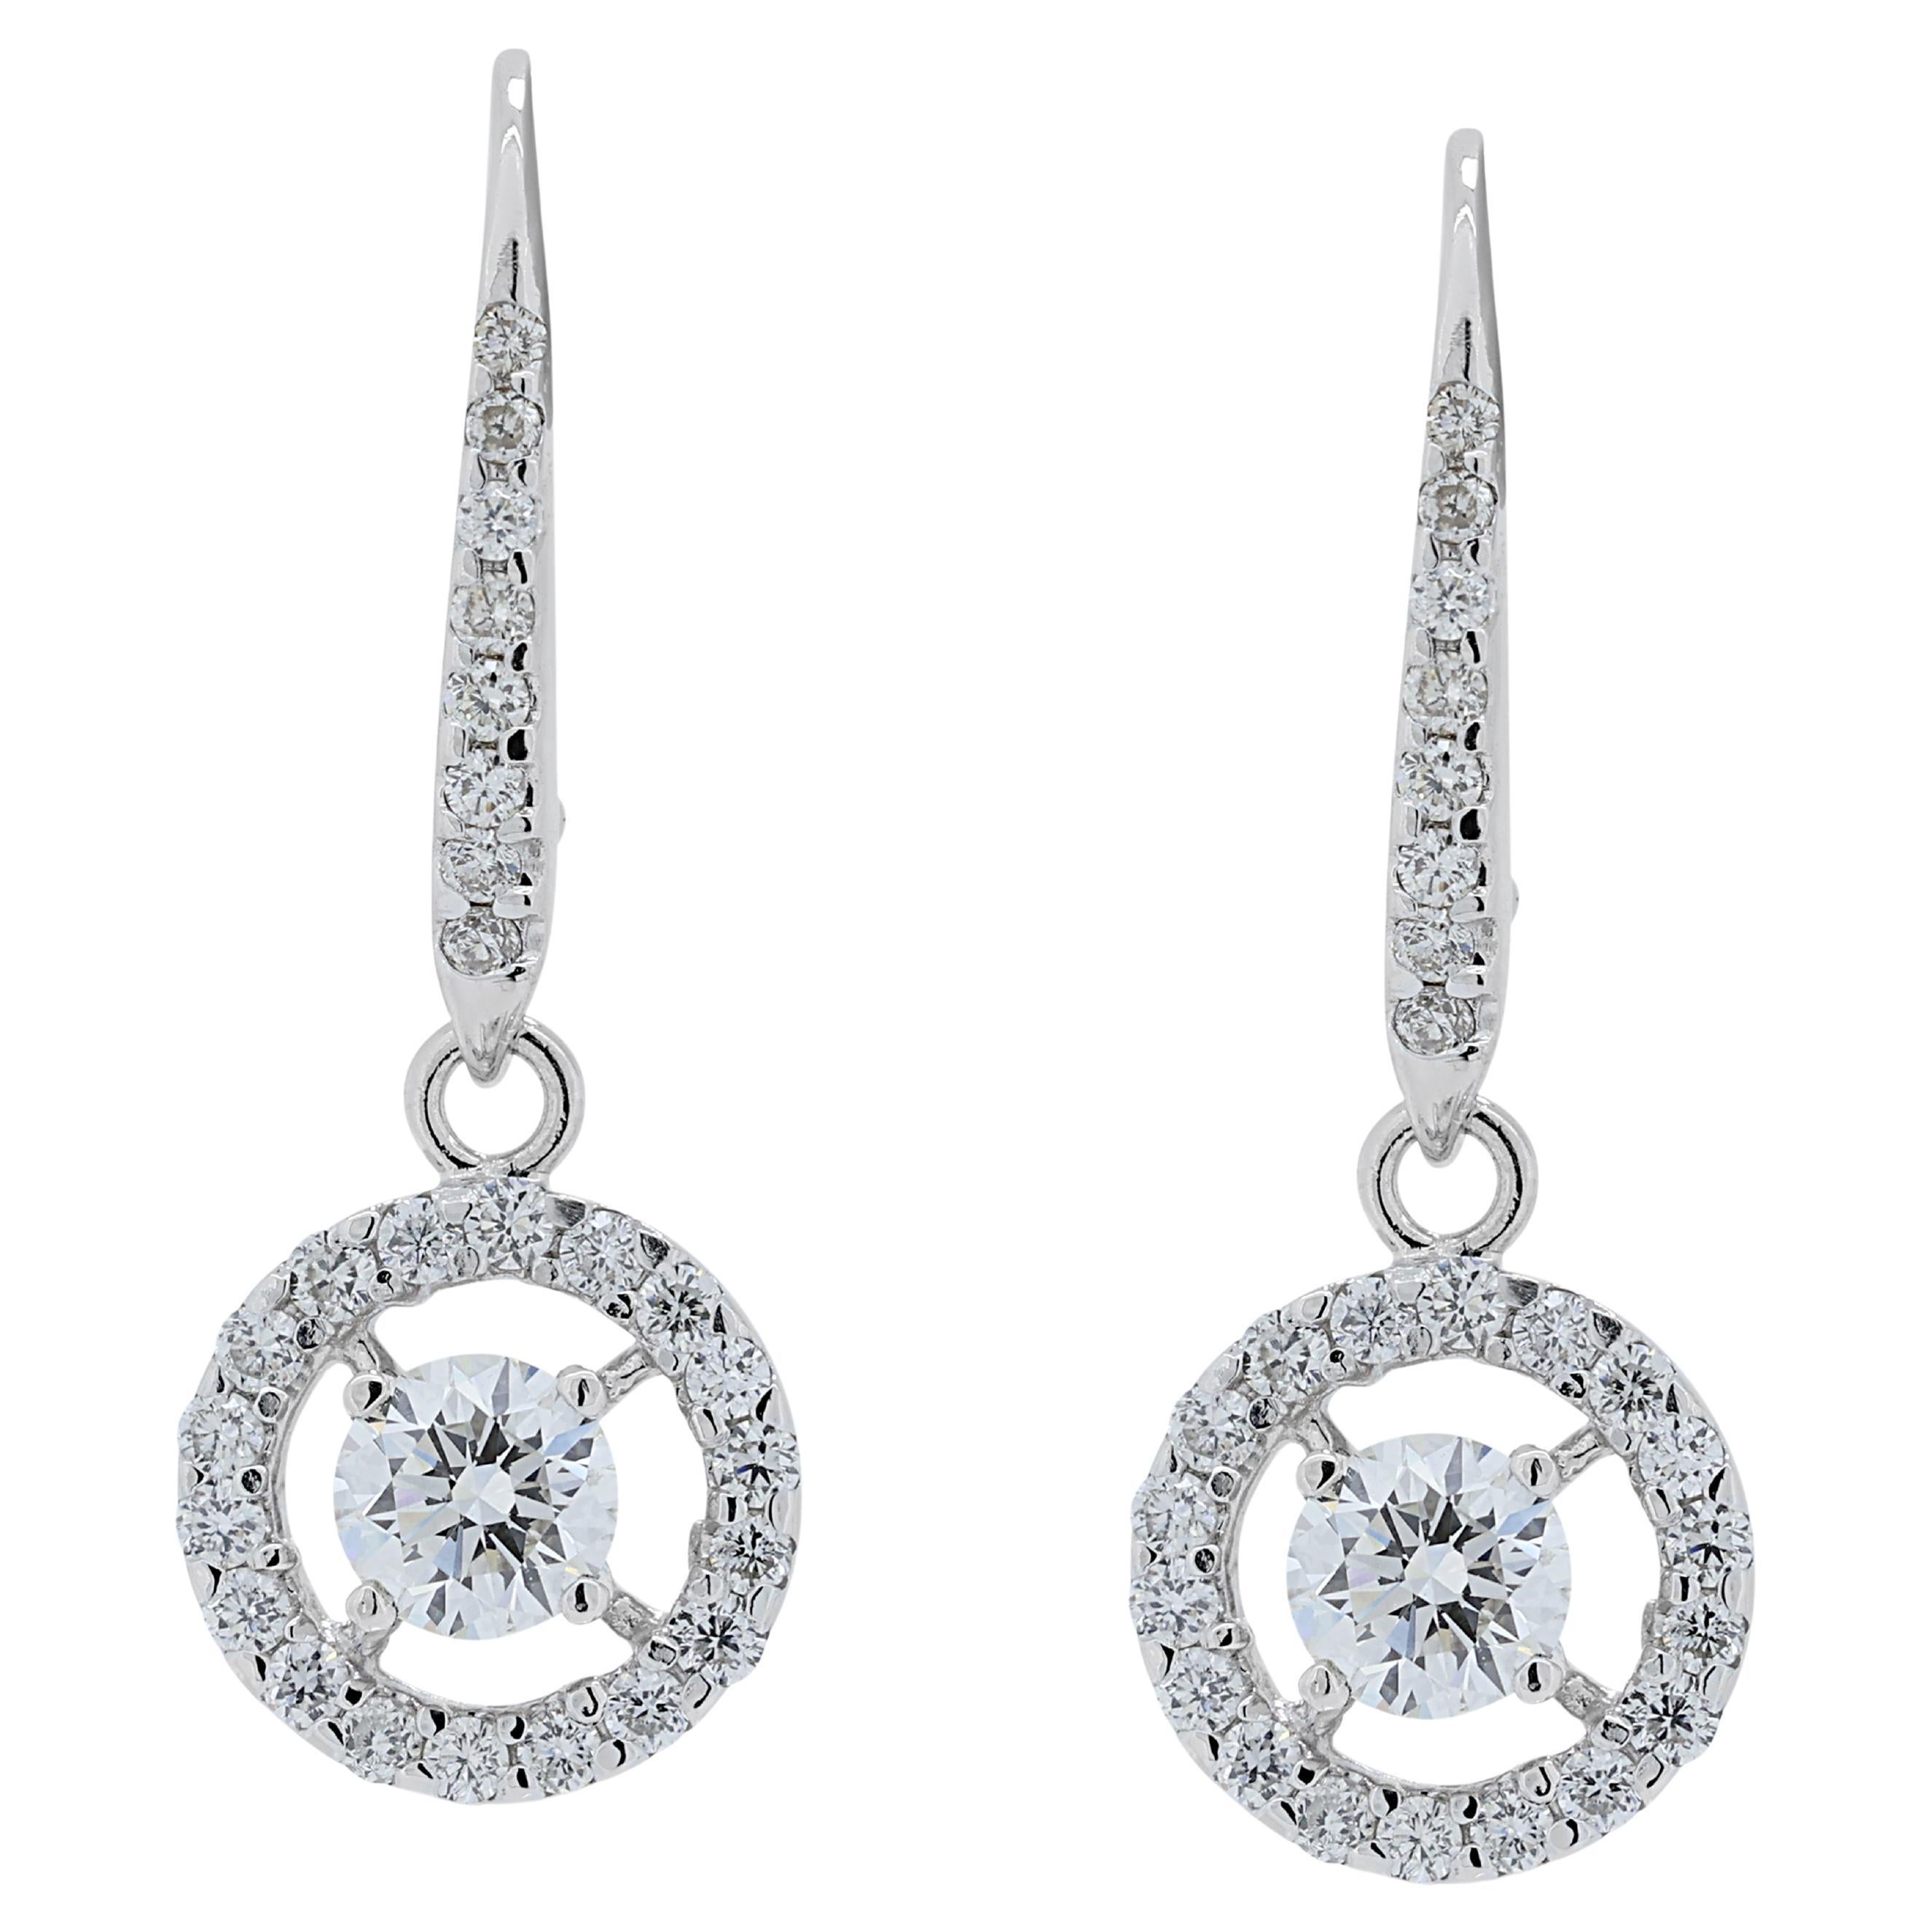 Fascinating 0.86ct Diamond Dangling Earrings in 18K White Gold  For Sale